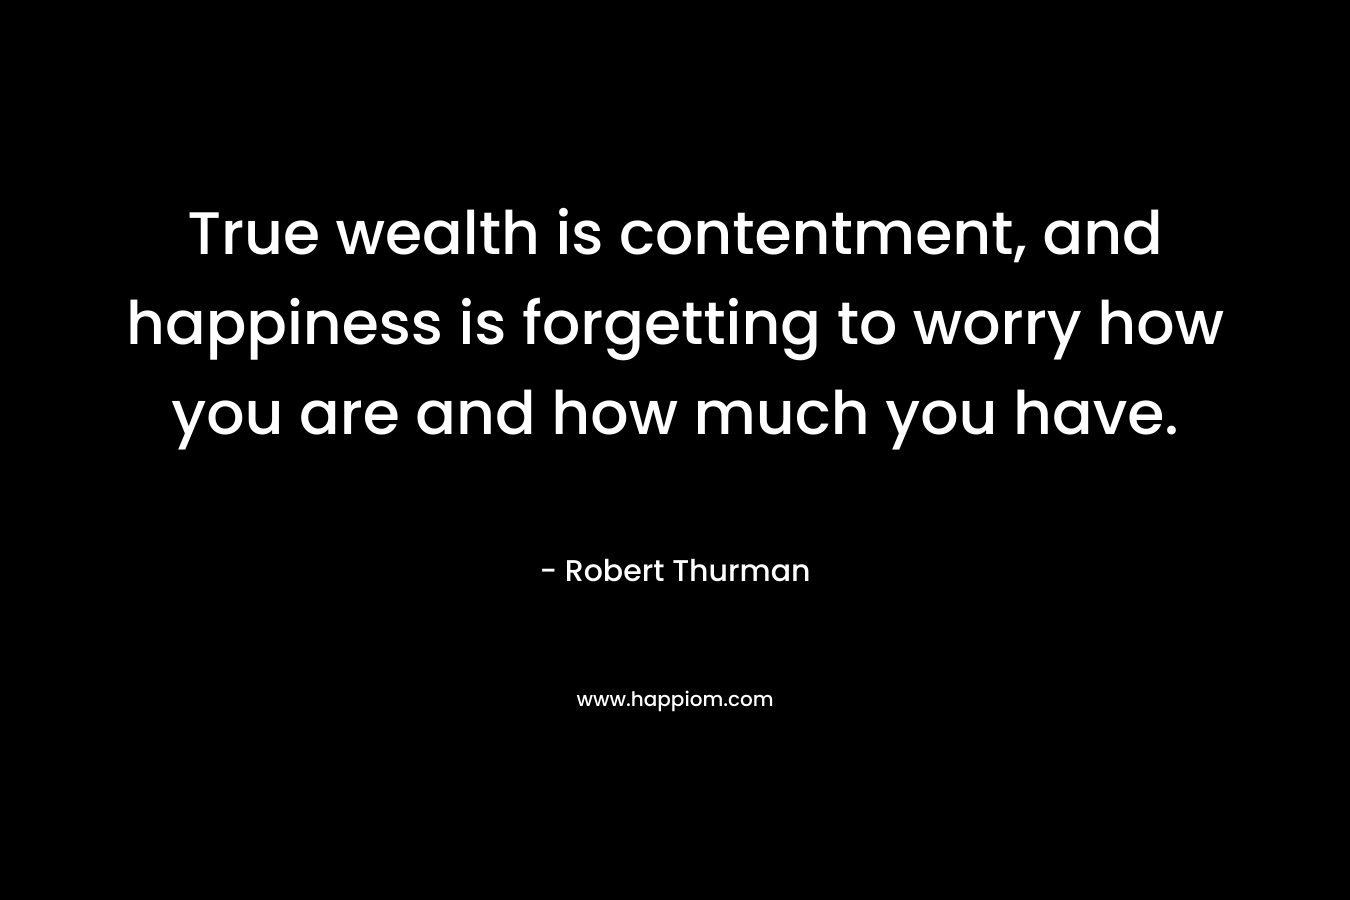 True wealth is contentment, and happiness is forgetting to worry how you are and how much you have. – Robert Thurman